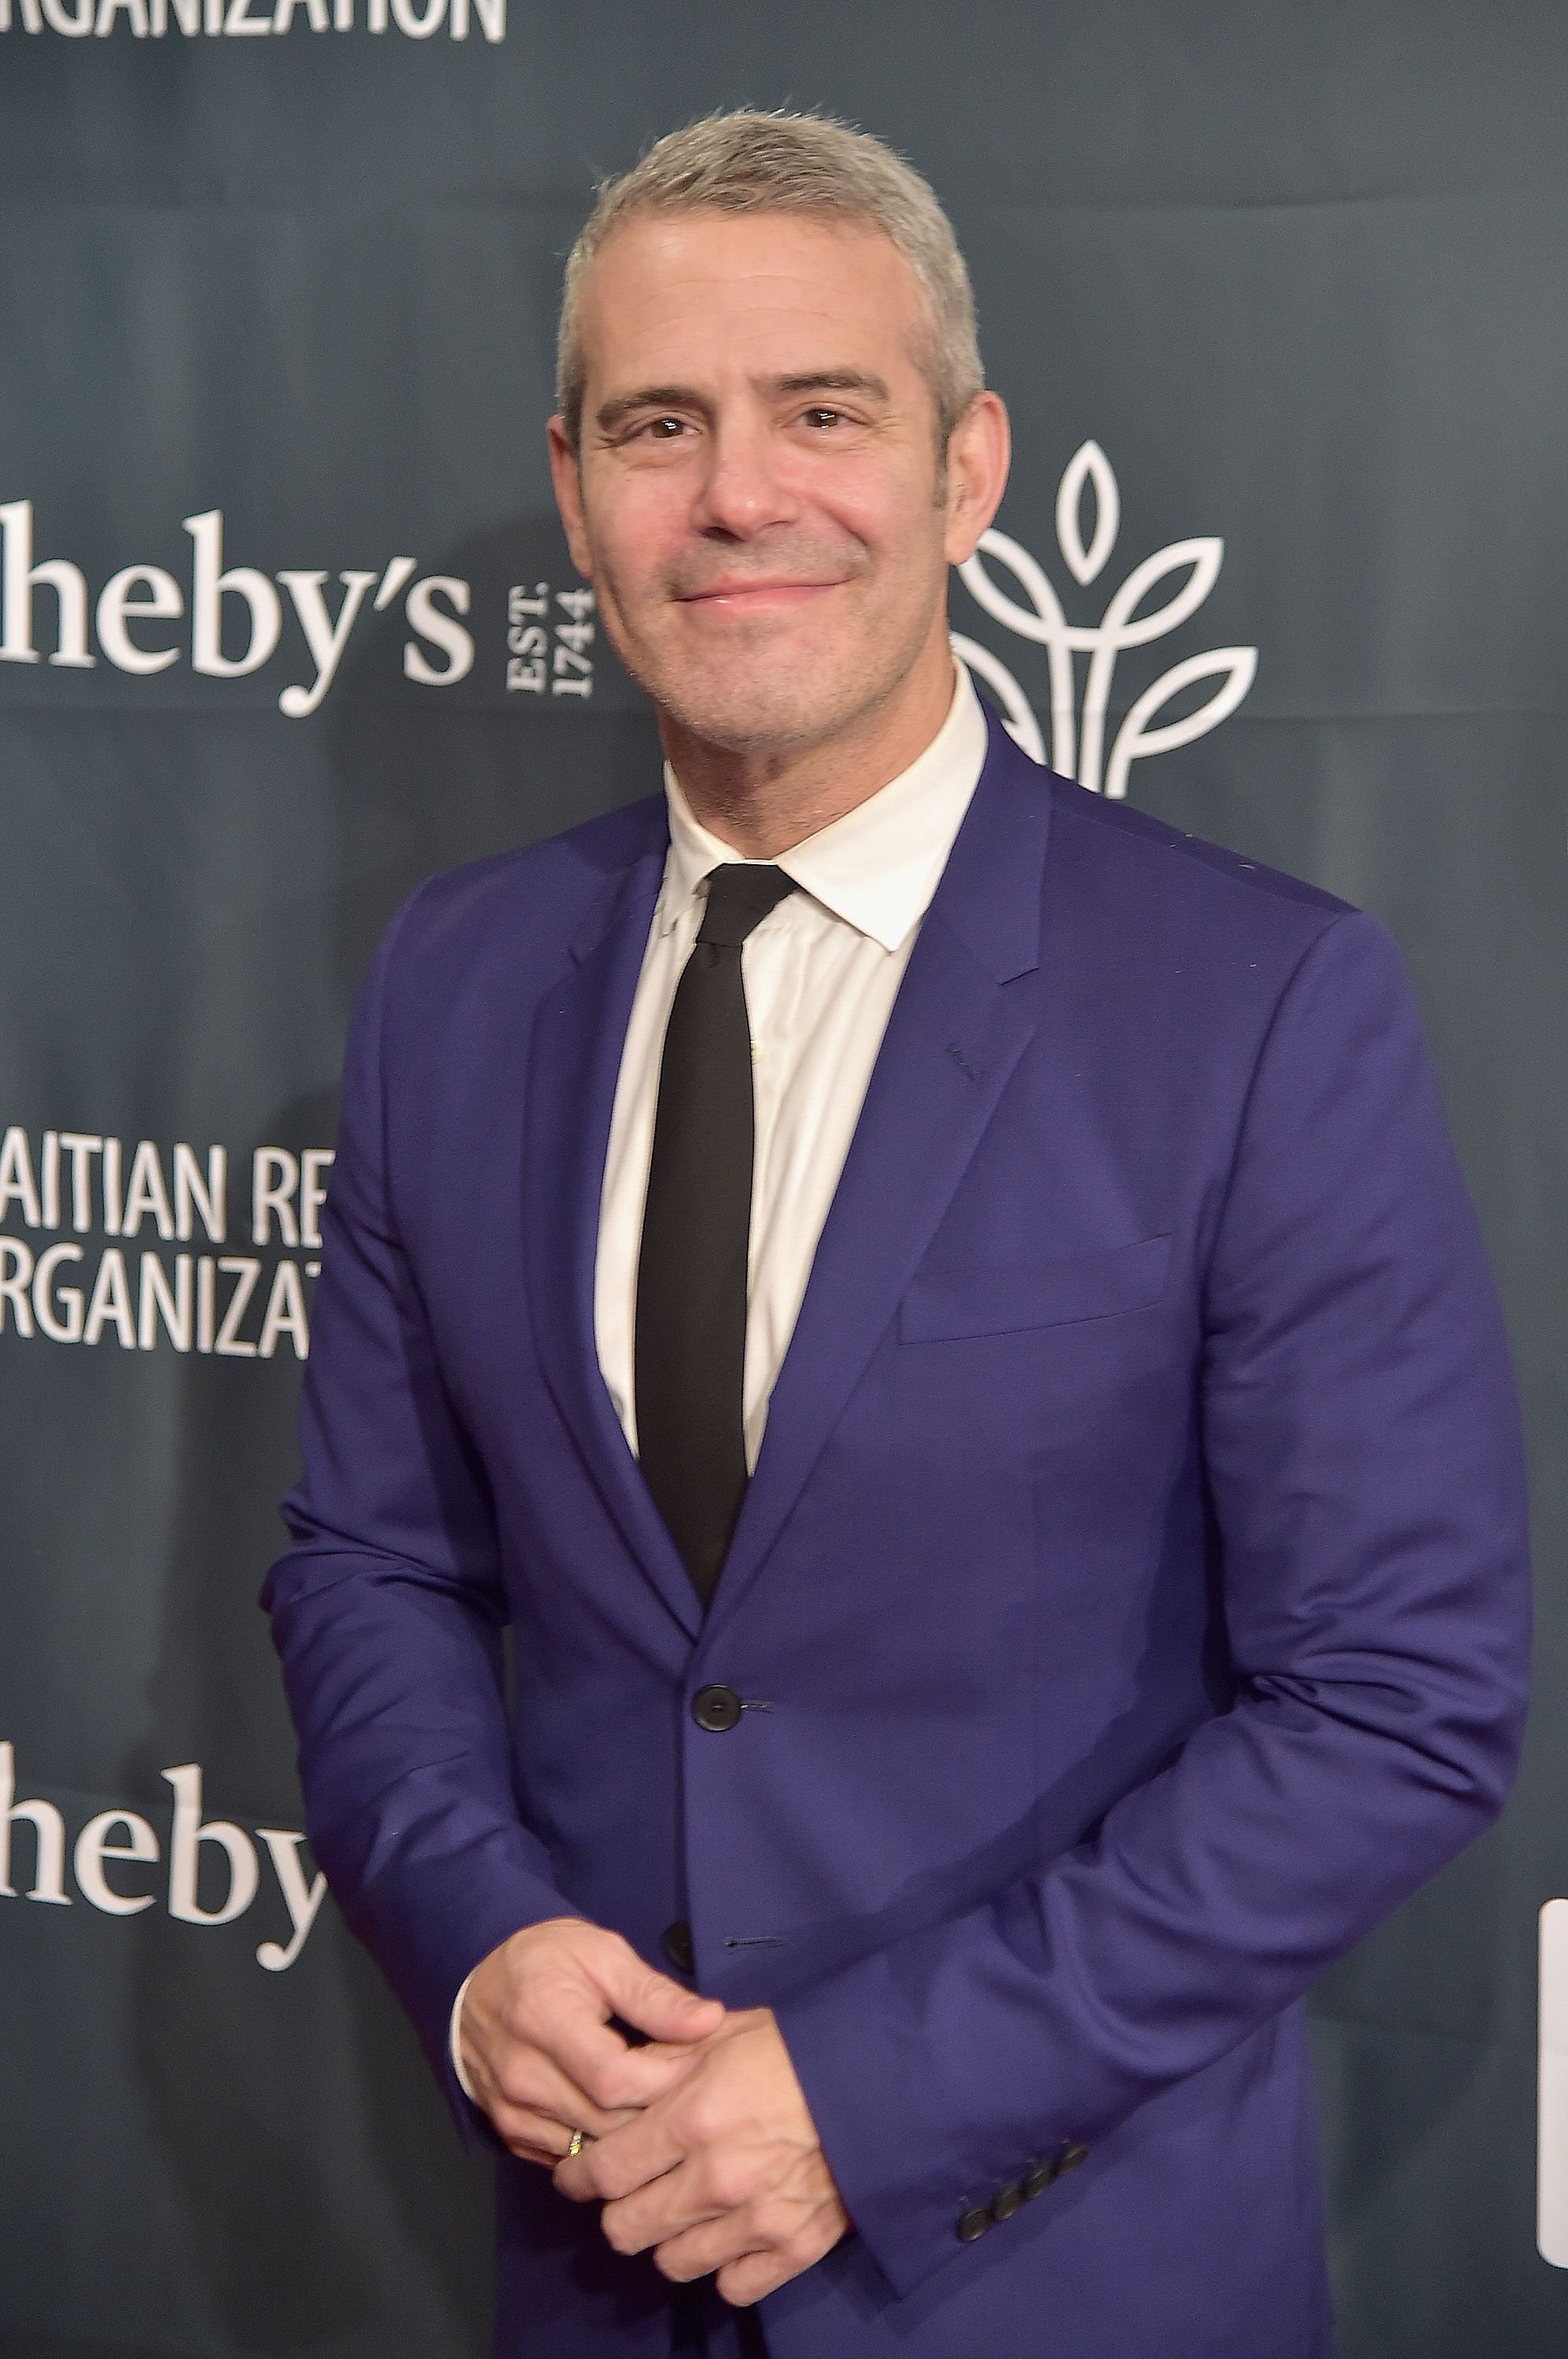 TV personality Andy Cohen at Sean Penn & Friends HAITI TAKES ROOT: A Benefit Dinner & Auction to Reforest & Rebuild Haiti to Support J/P Haitian Relief Organization at Sotheby's on May 5, 2017 | Photo: Getty Images